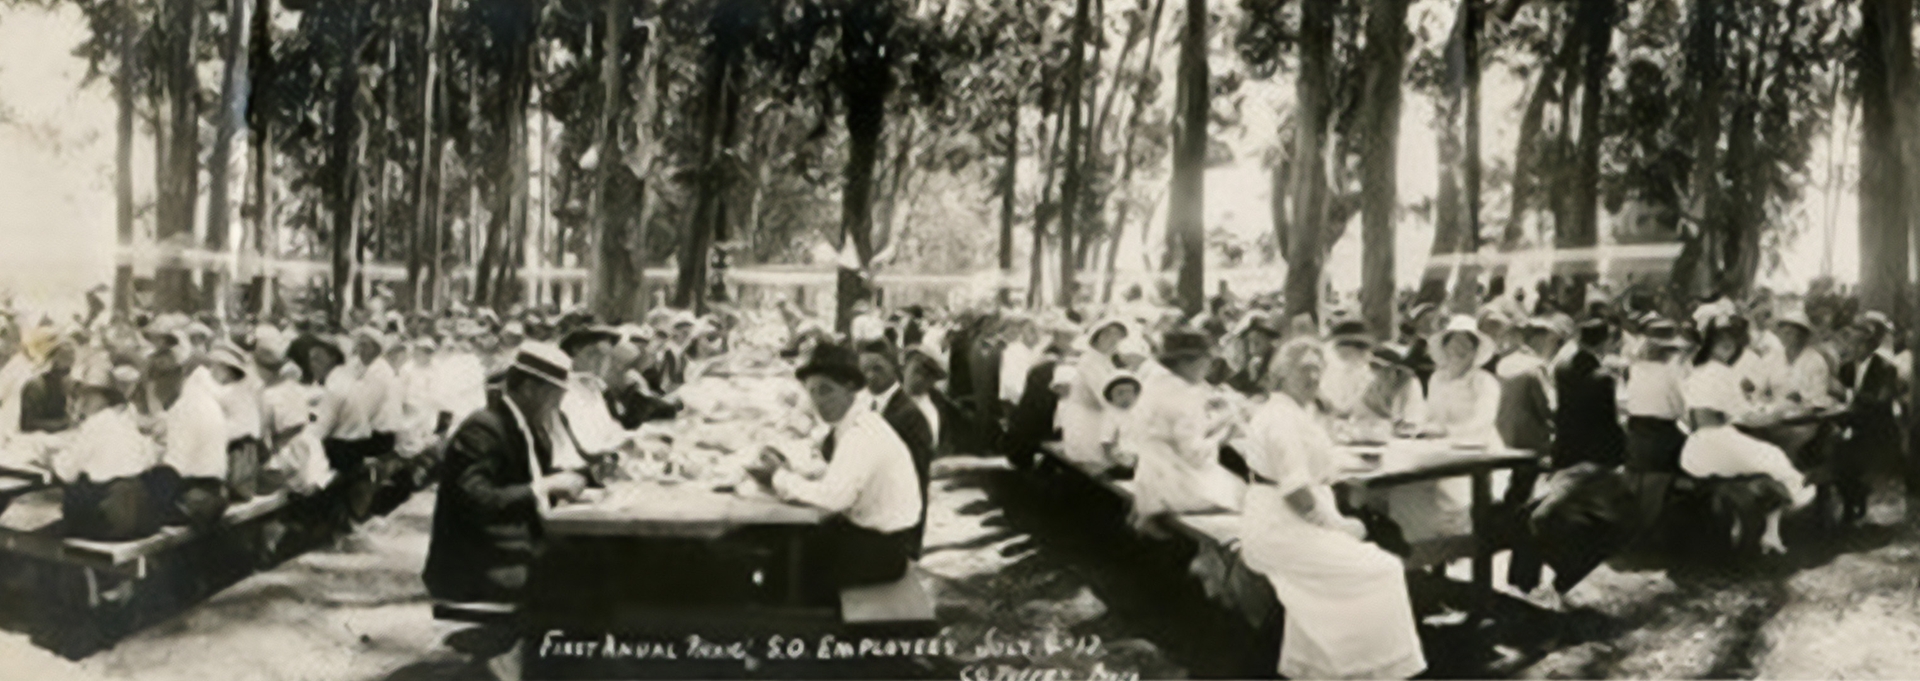 In 1919, employees and their families wore their best to attend the first annual Standard Oil picnic.